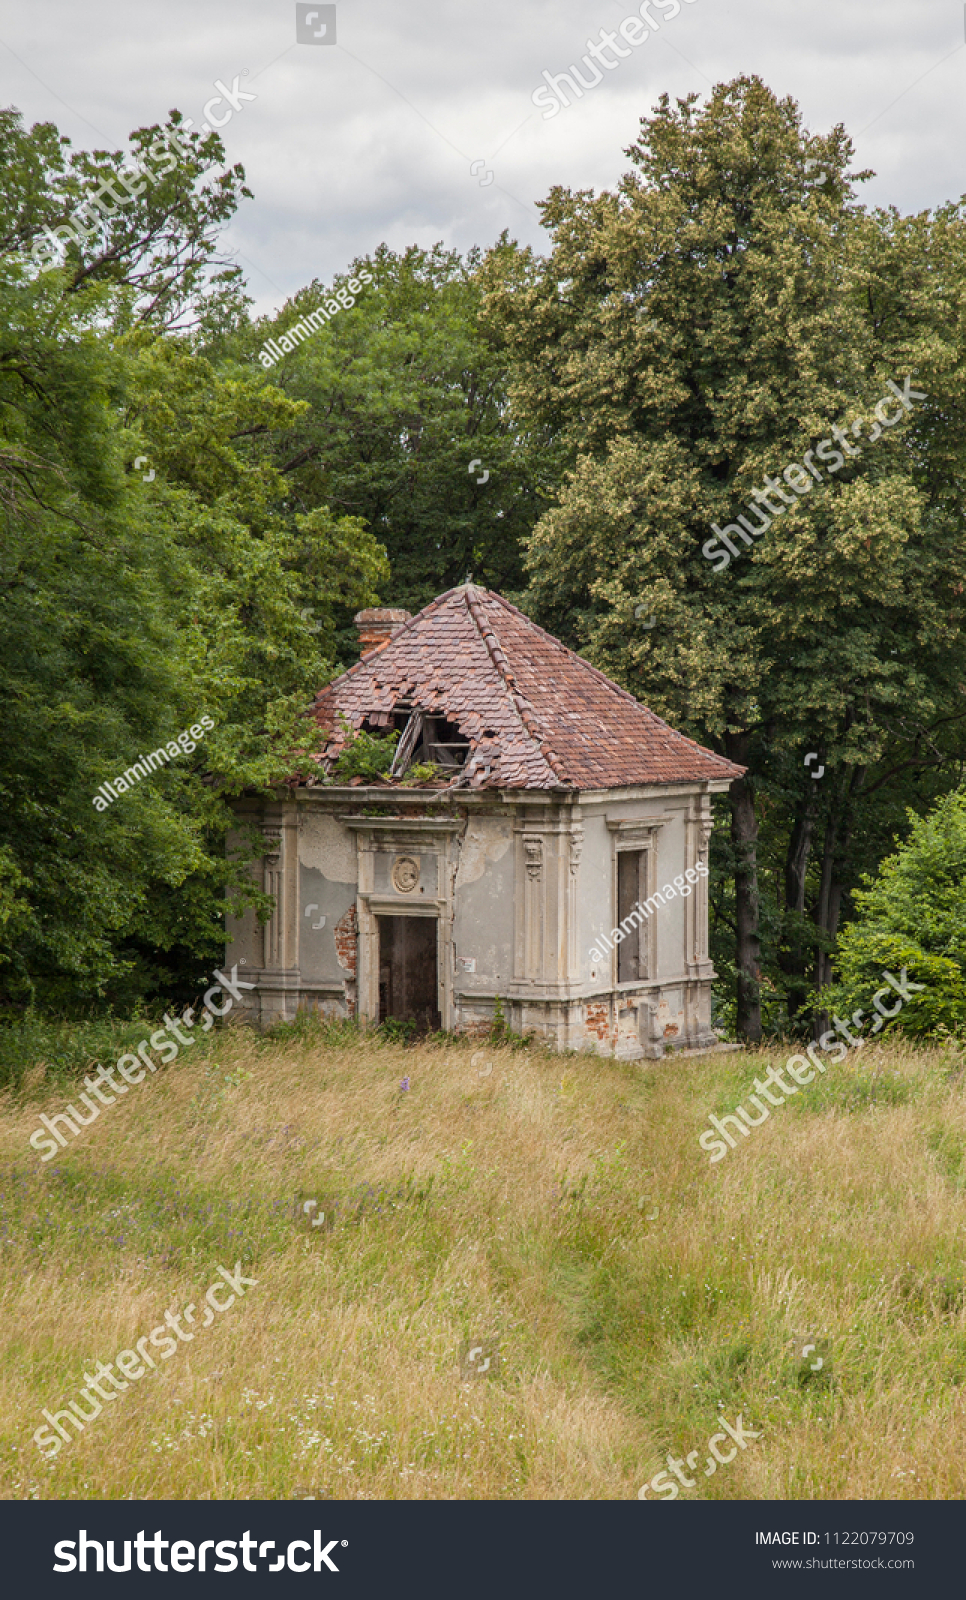 Very old historic building with wonderful architecture Old stones in the nature of the stone building is a wonderful design pastel grey color shades of green nature. #1122079709